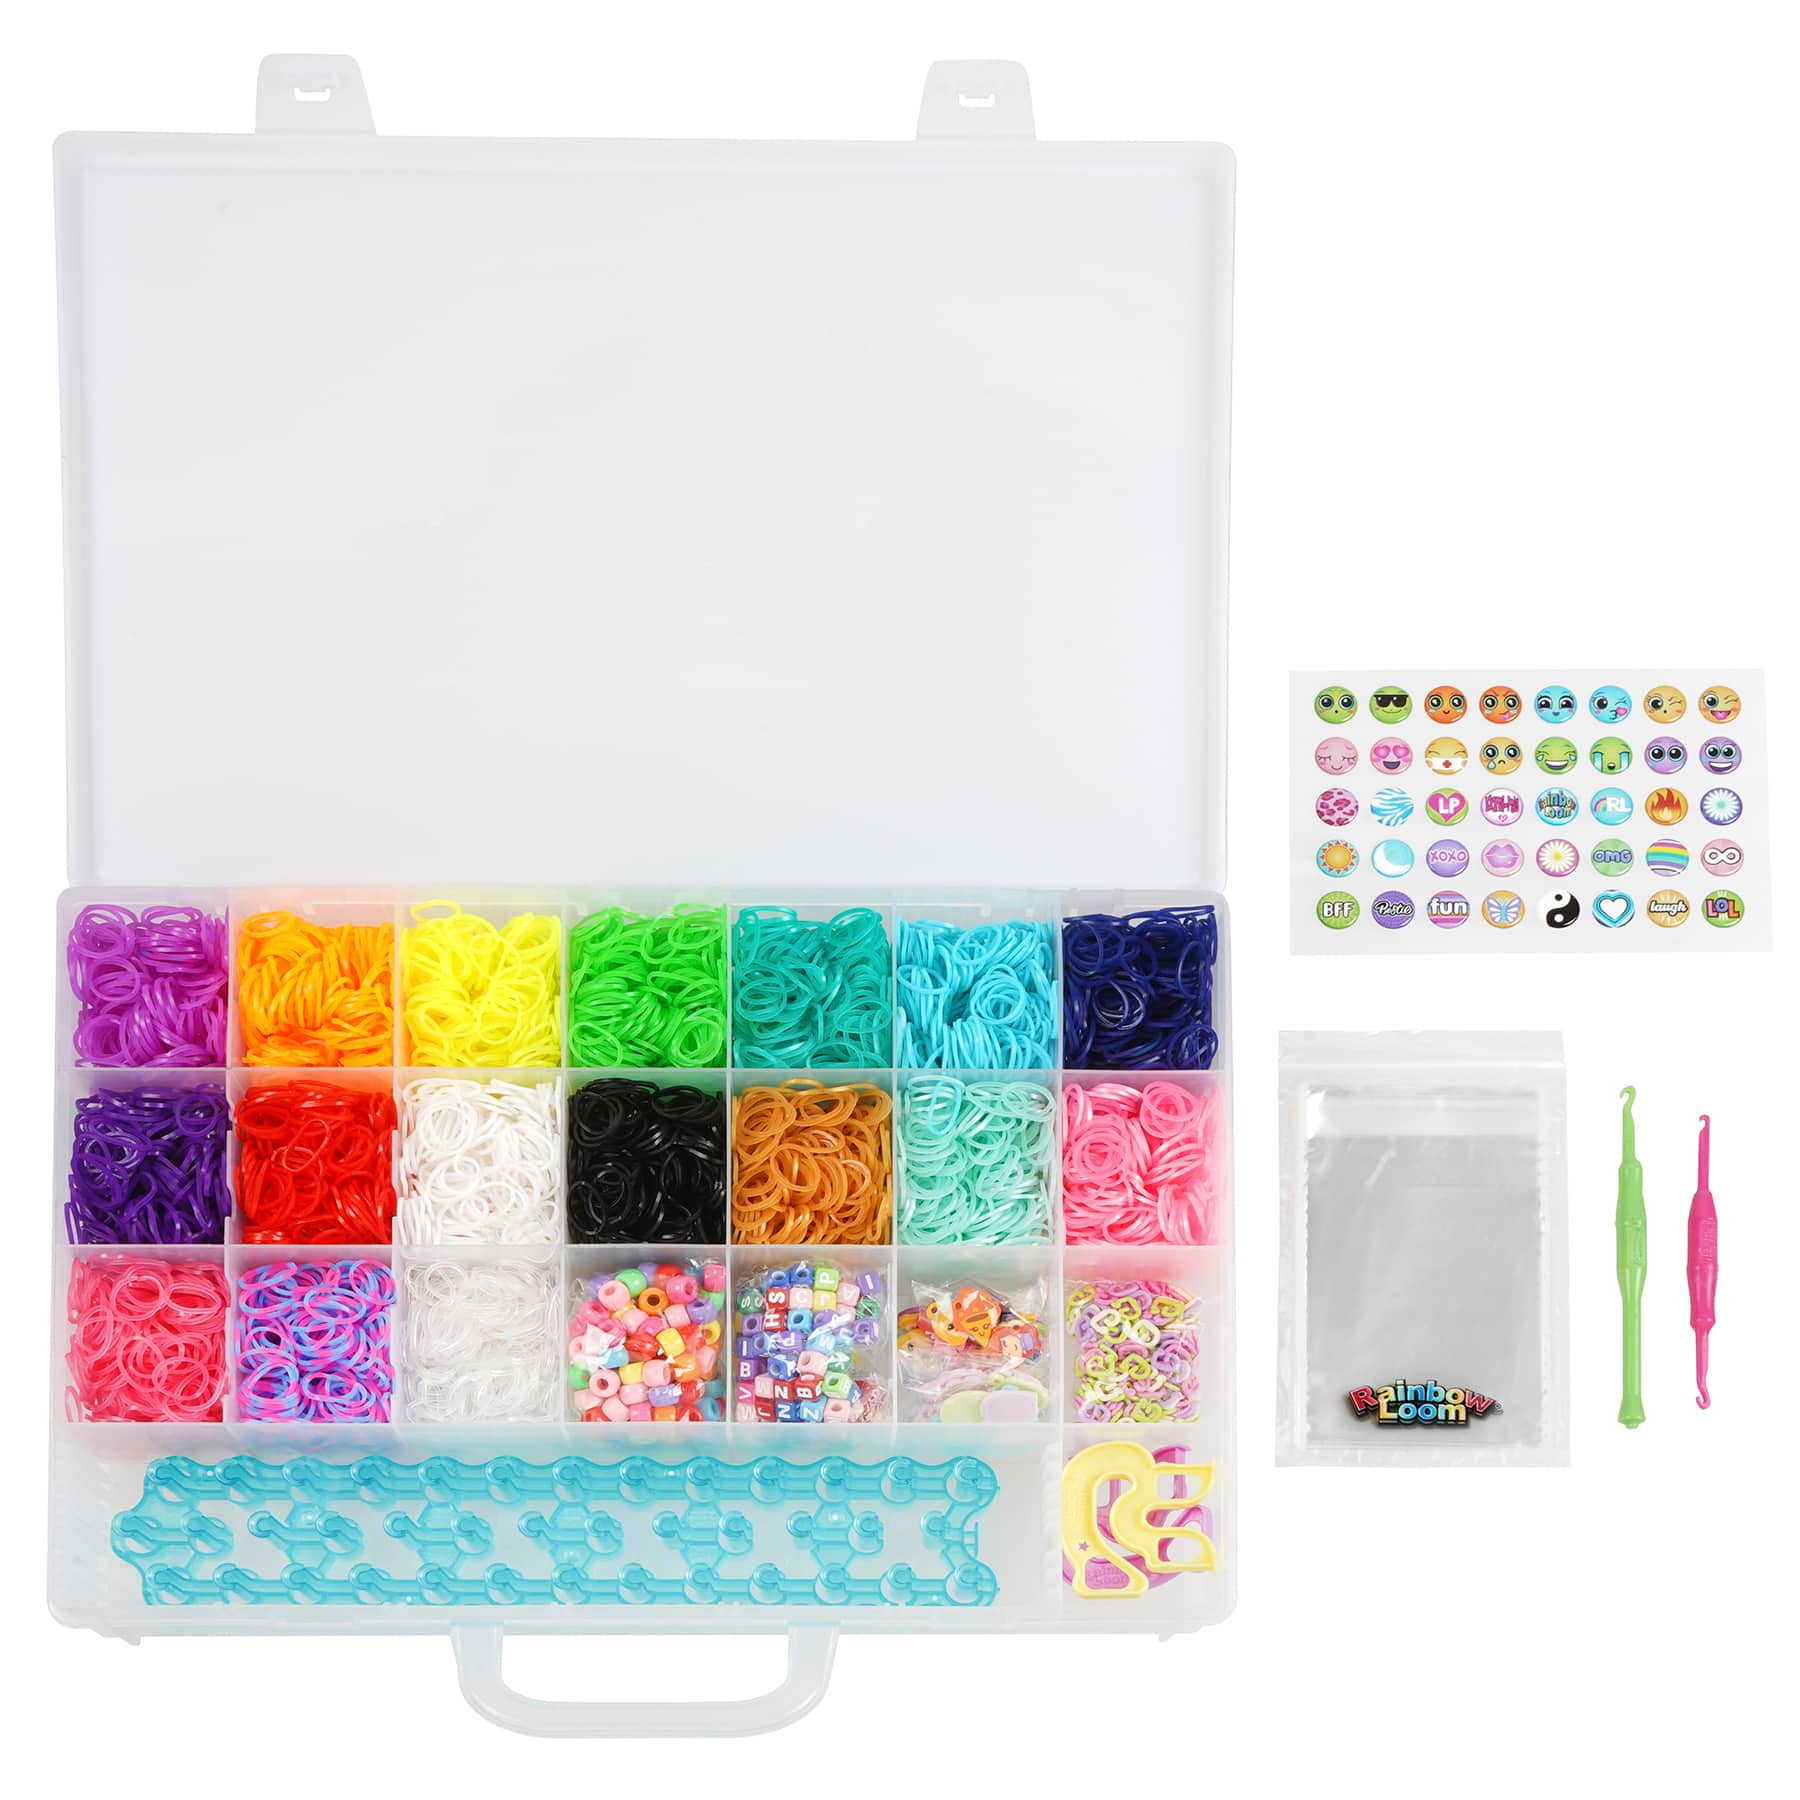 Loom Band Ideas - Patterns and Measuring